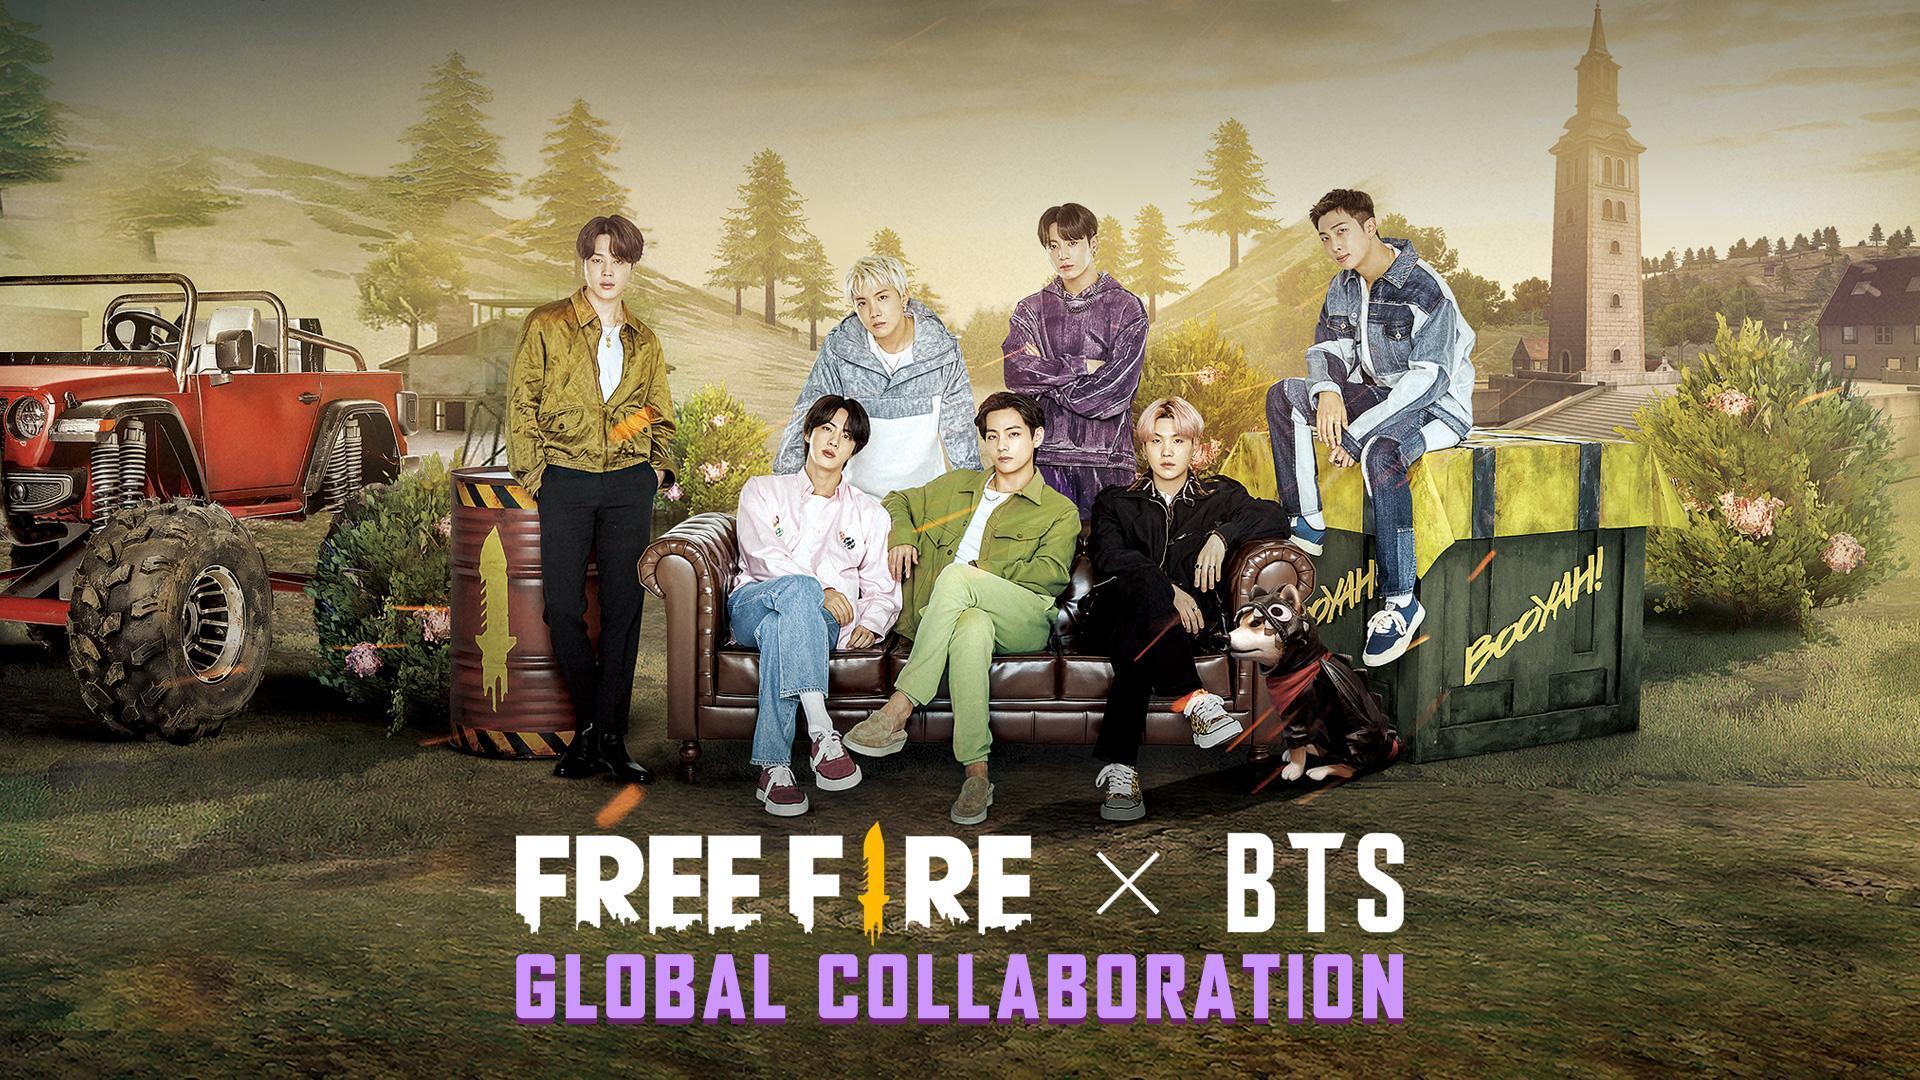 Bts mic drops their way into garena free fire via a new collaboration event this march